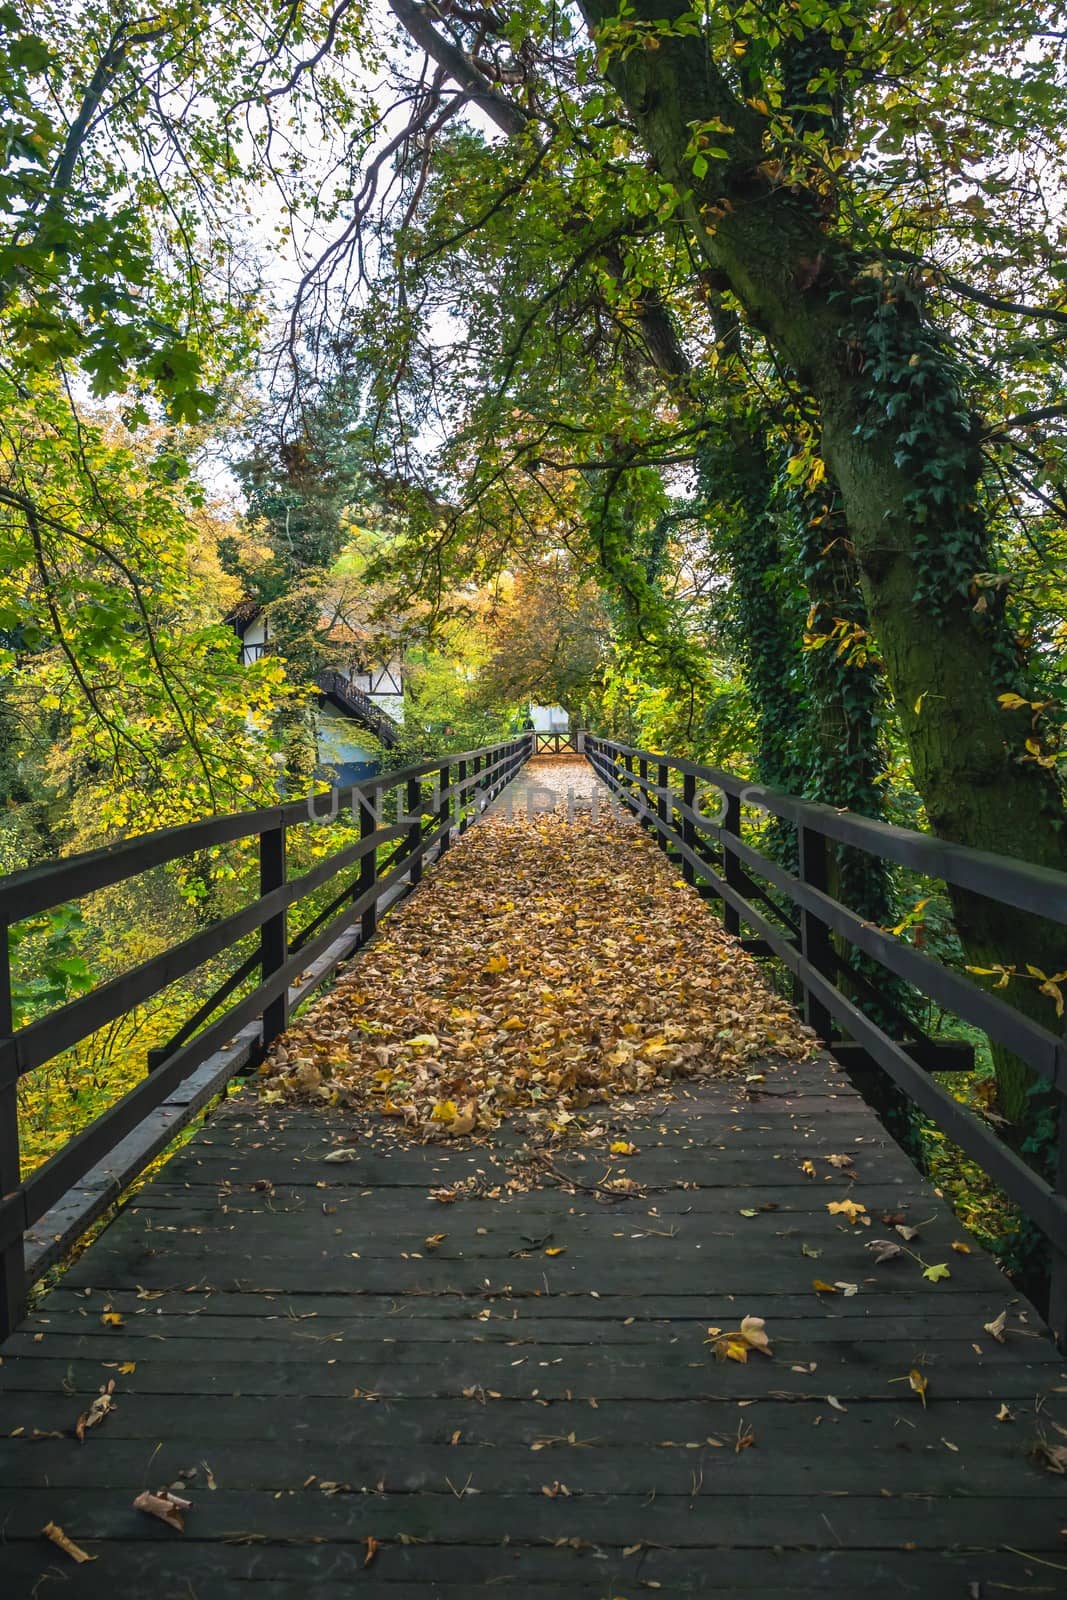 Historic wooden bridge in a park surrounded by autumn colors in a foggy morning. Ner castle Loucen. by petrsvoboda91